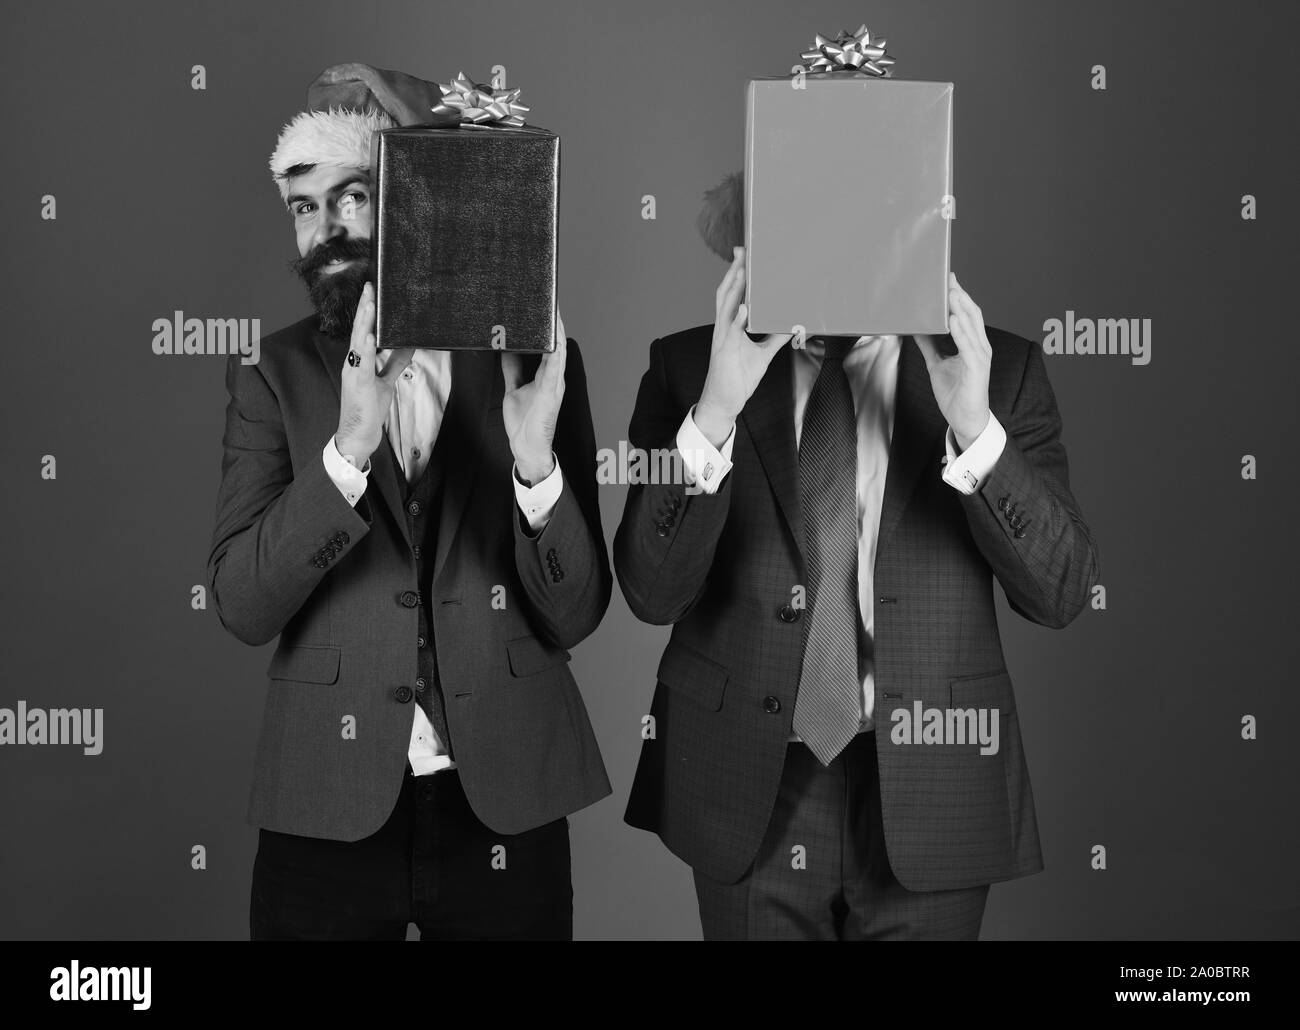 Businessmen Hide Faces Behind Red And Blue Present Boxes Men In Smart Suits And Santa Hats On Blue Background Manager With Beard And Smile Holds Christmas Gift New Year Sales Business Concept